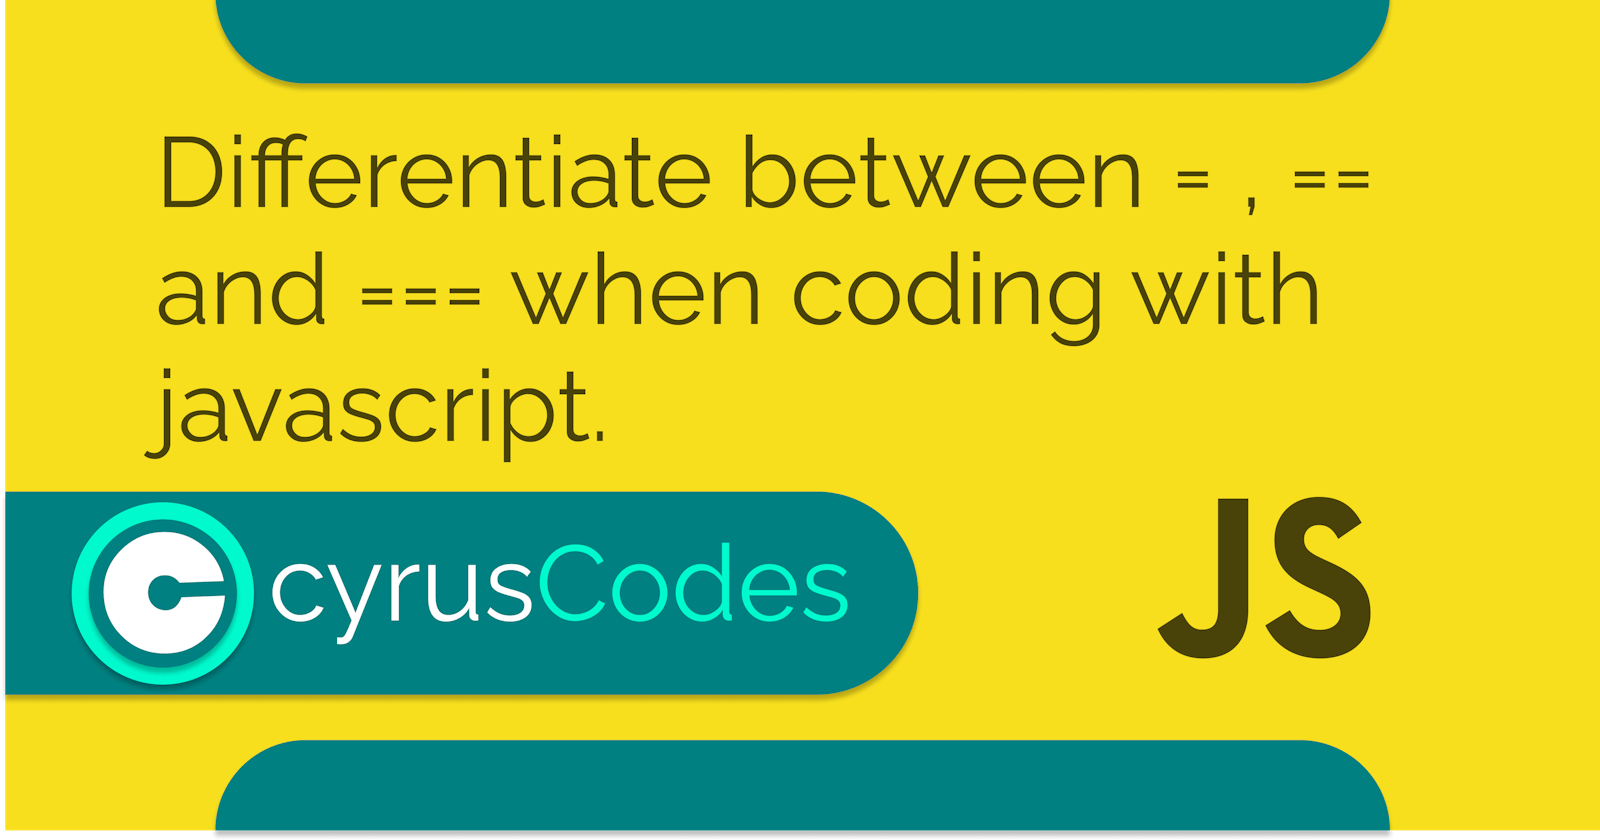 Differentiate between = , == and === when coding with javascript.